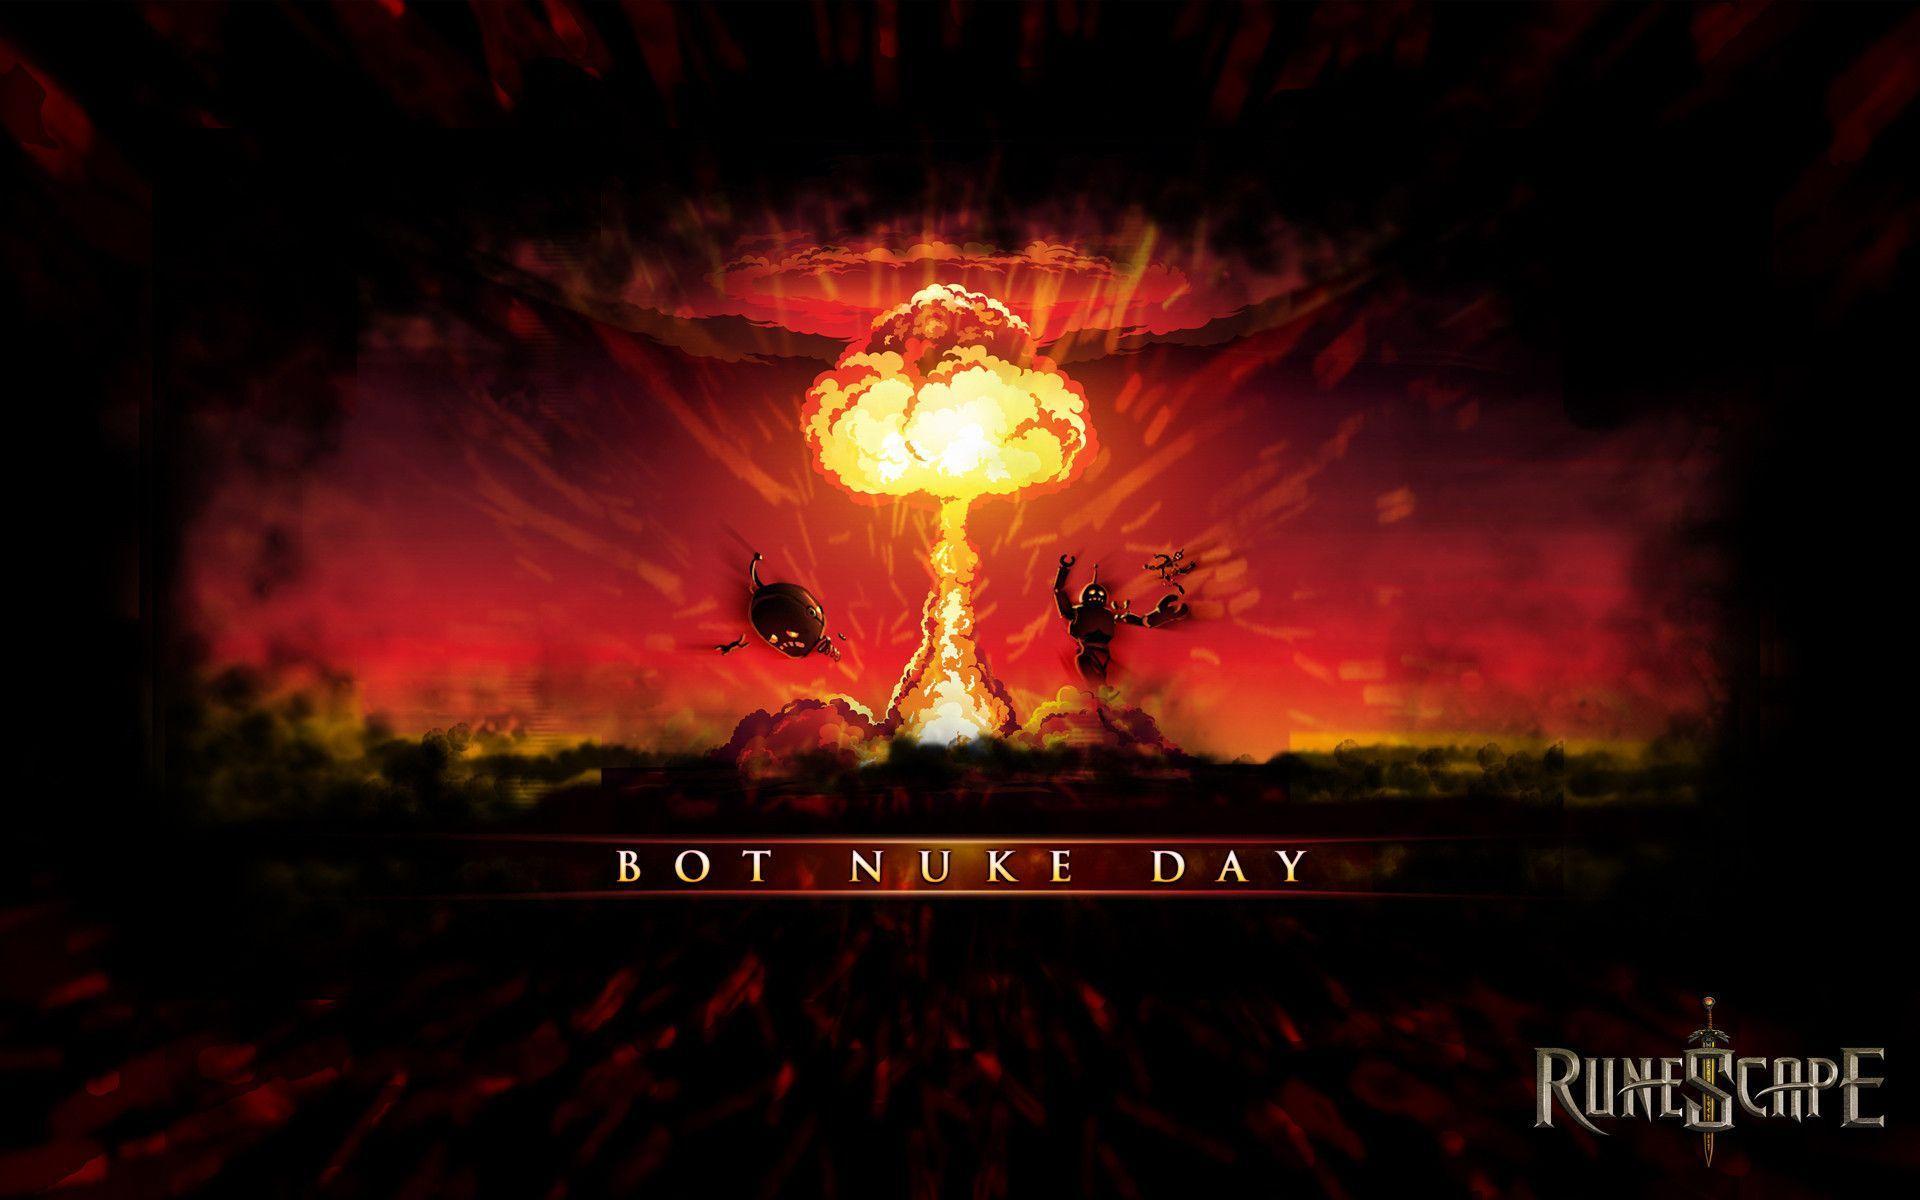 Nuclear Explosion Wallpapers